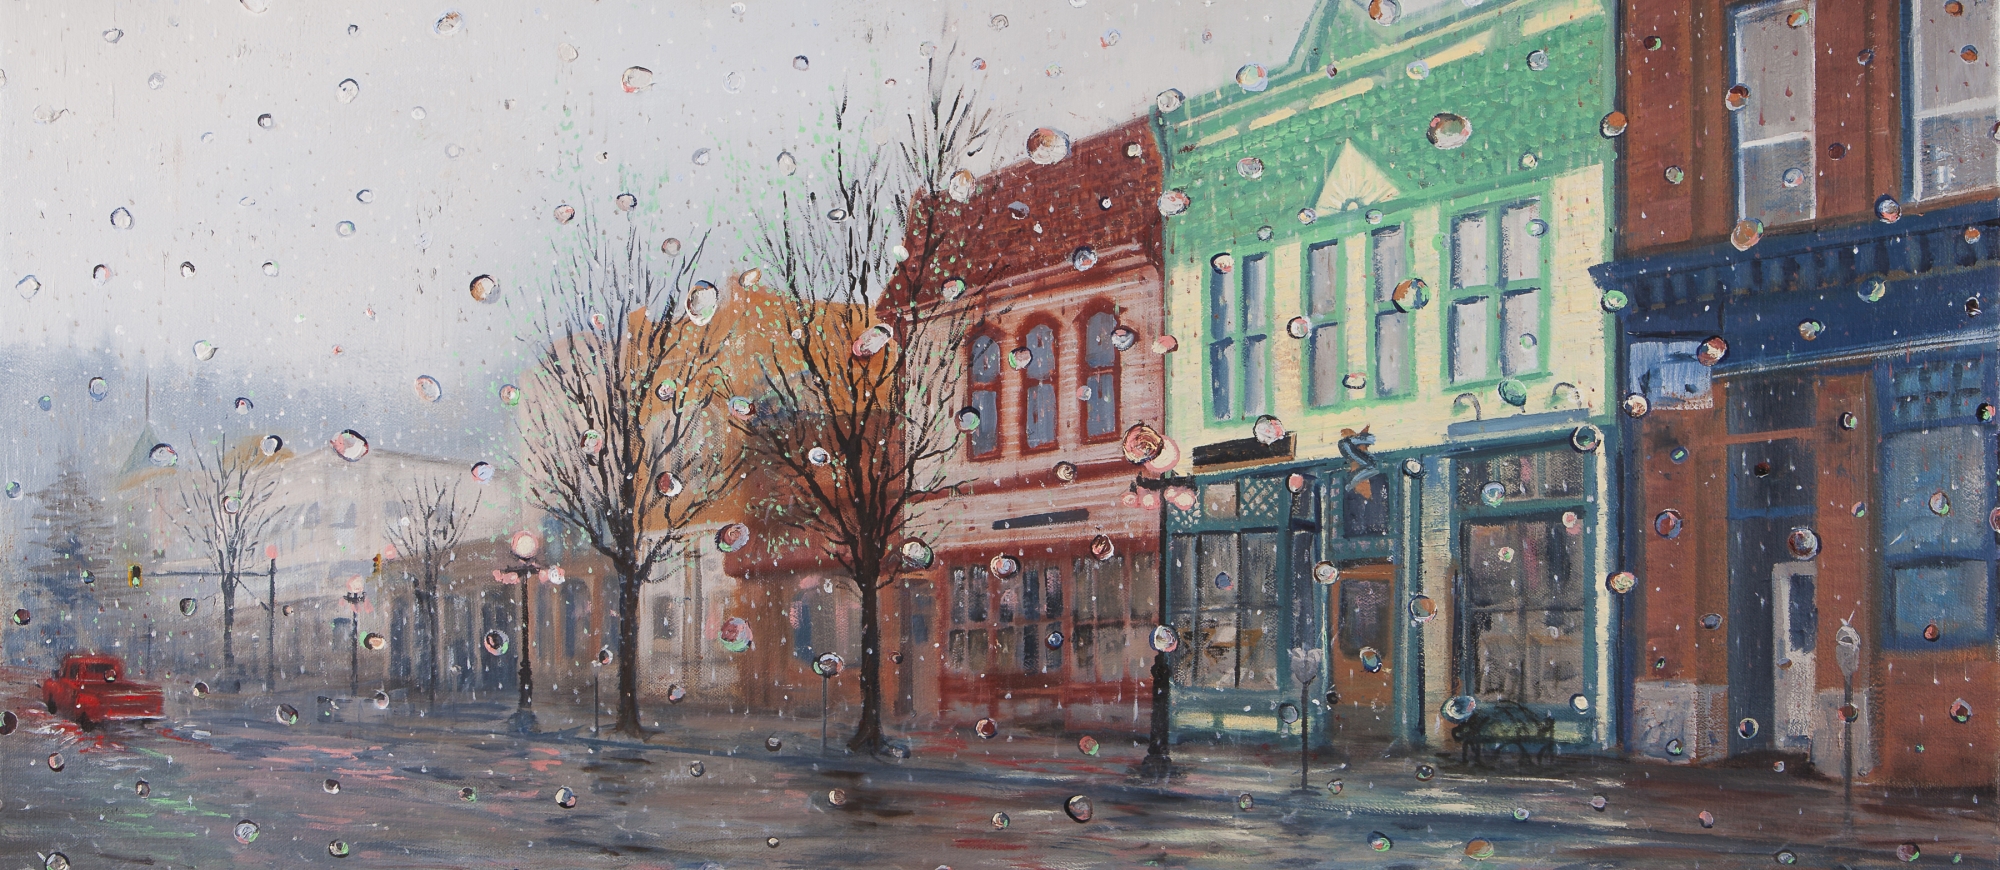 Rainy Day on Baker Street in Nelson BC